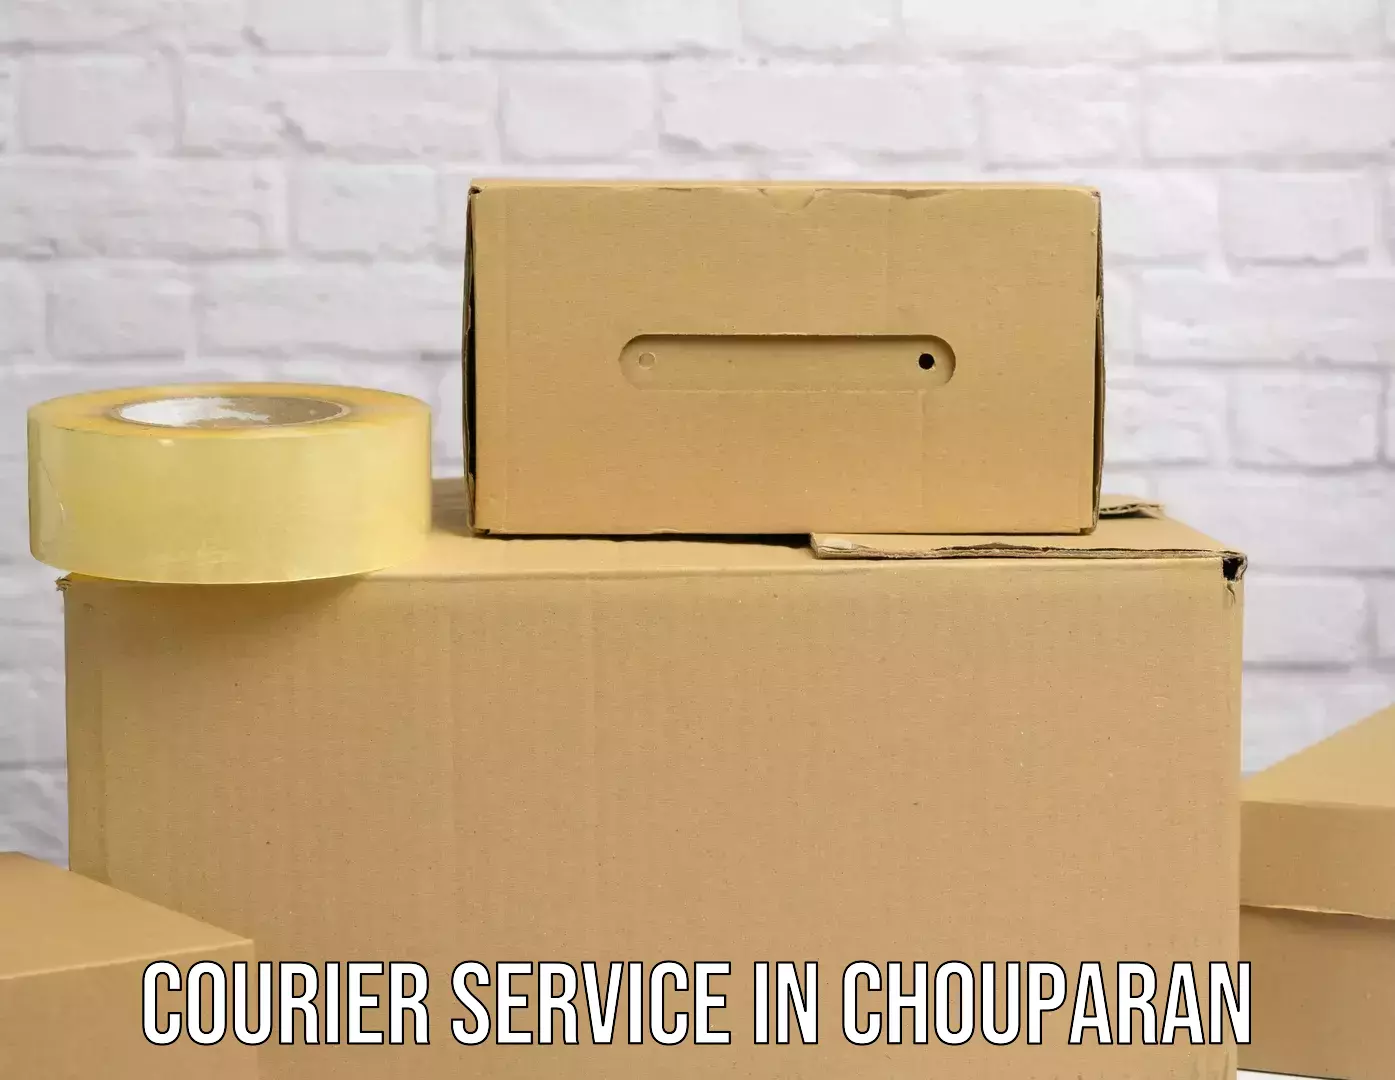 Expedited parcel delivery in Chouparan